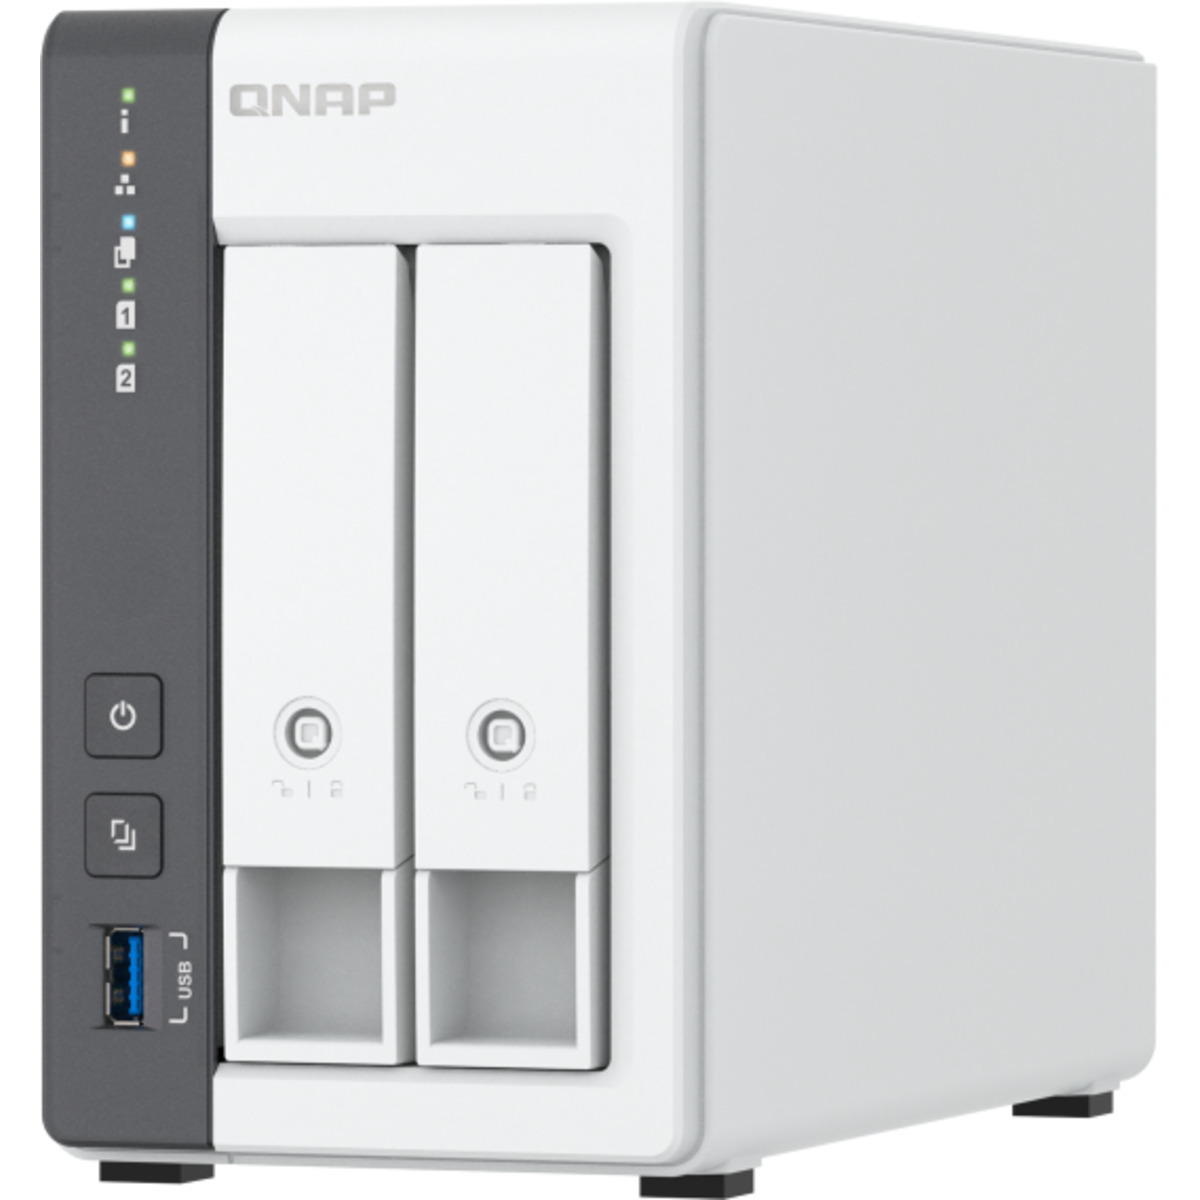 QNAP TS-216G 8tb 2-Bay Desktop Personal / Basic Home / Small Office NAS - Network Attached Storage Device 2x4tb Toshiba MN Series MN08ADA400E 3.5 7200rpm SATA 6Gb/s HDD NAS Class Drives Installed - Burn-In Tested - ON SALE TS-216G